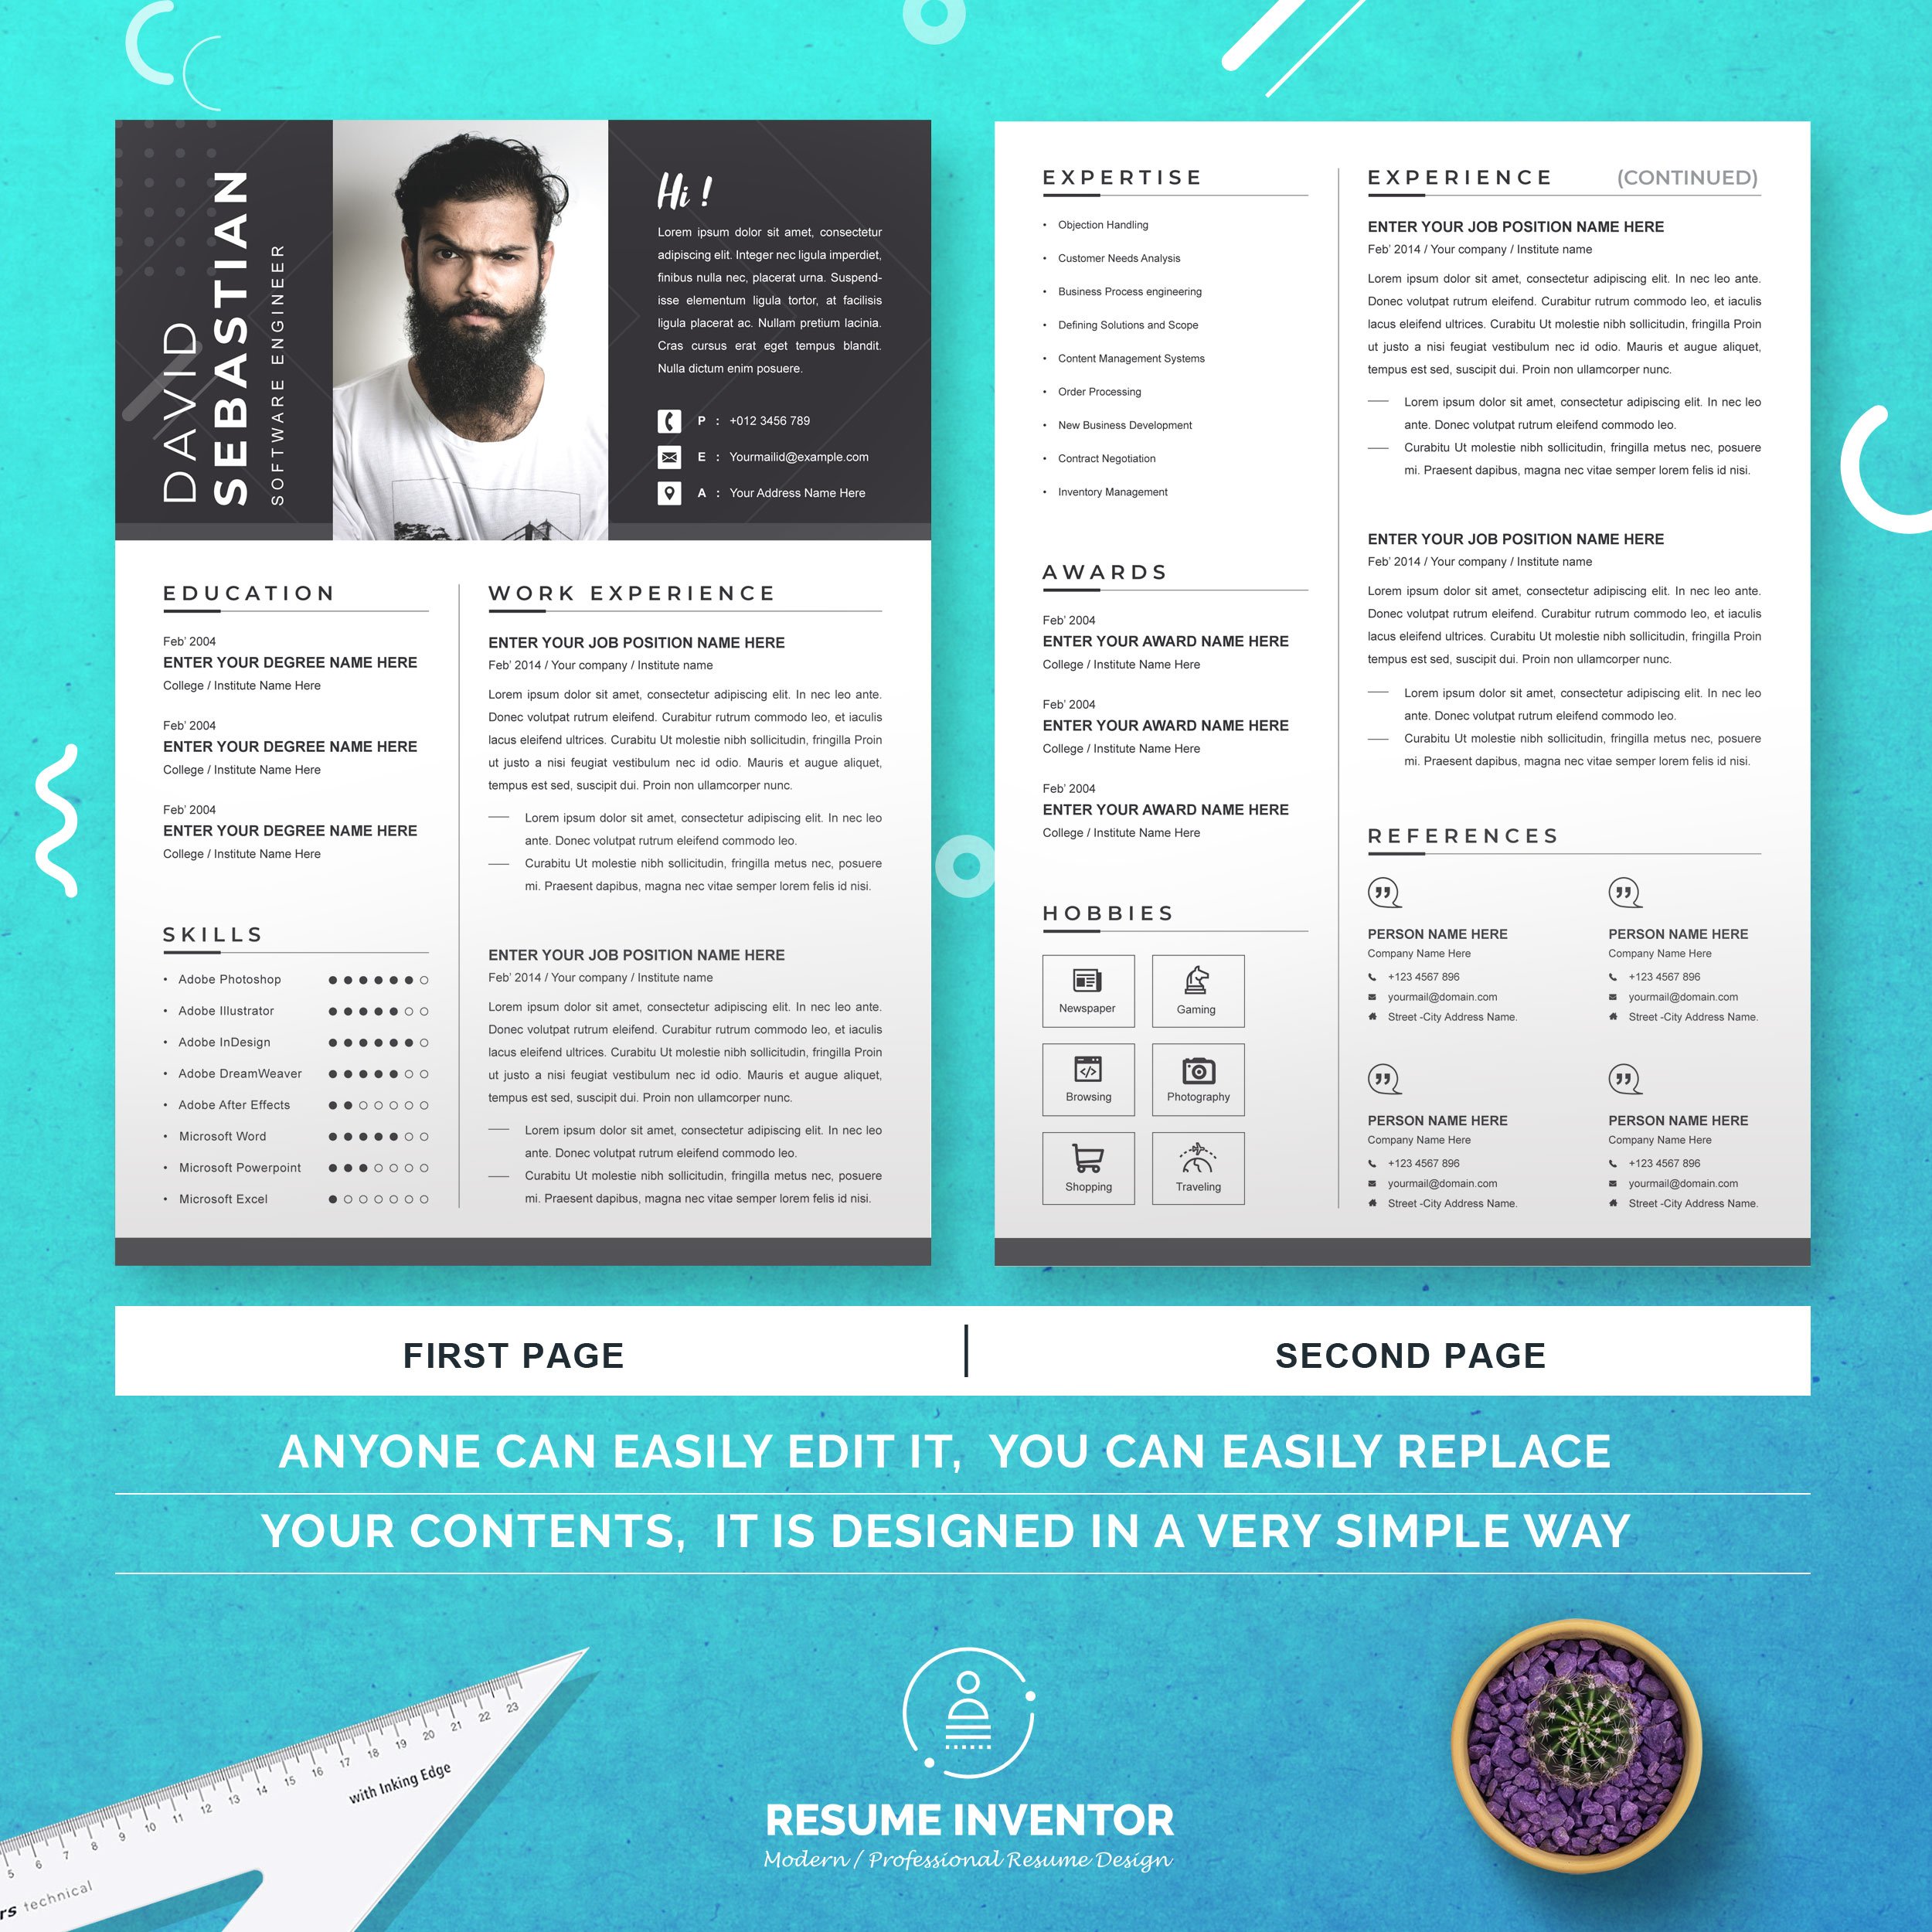 A4 Curriculum Vitae | Cover Letter preview image.